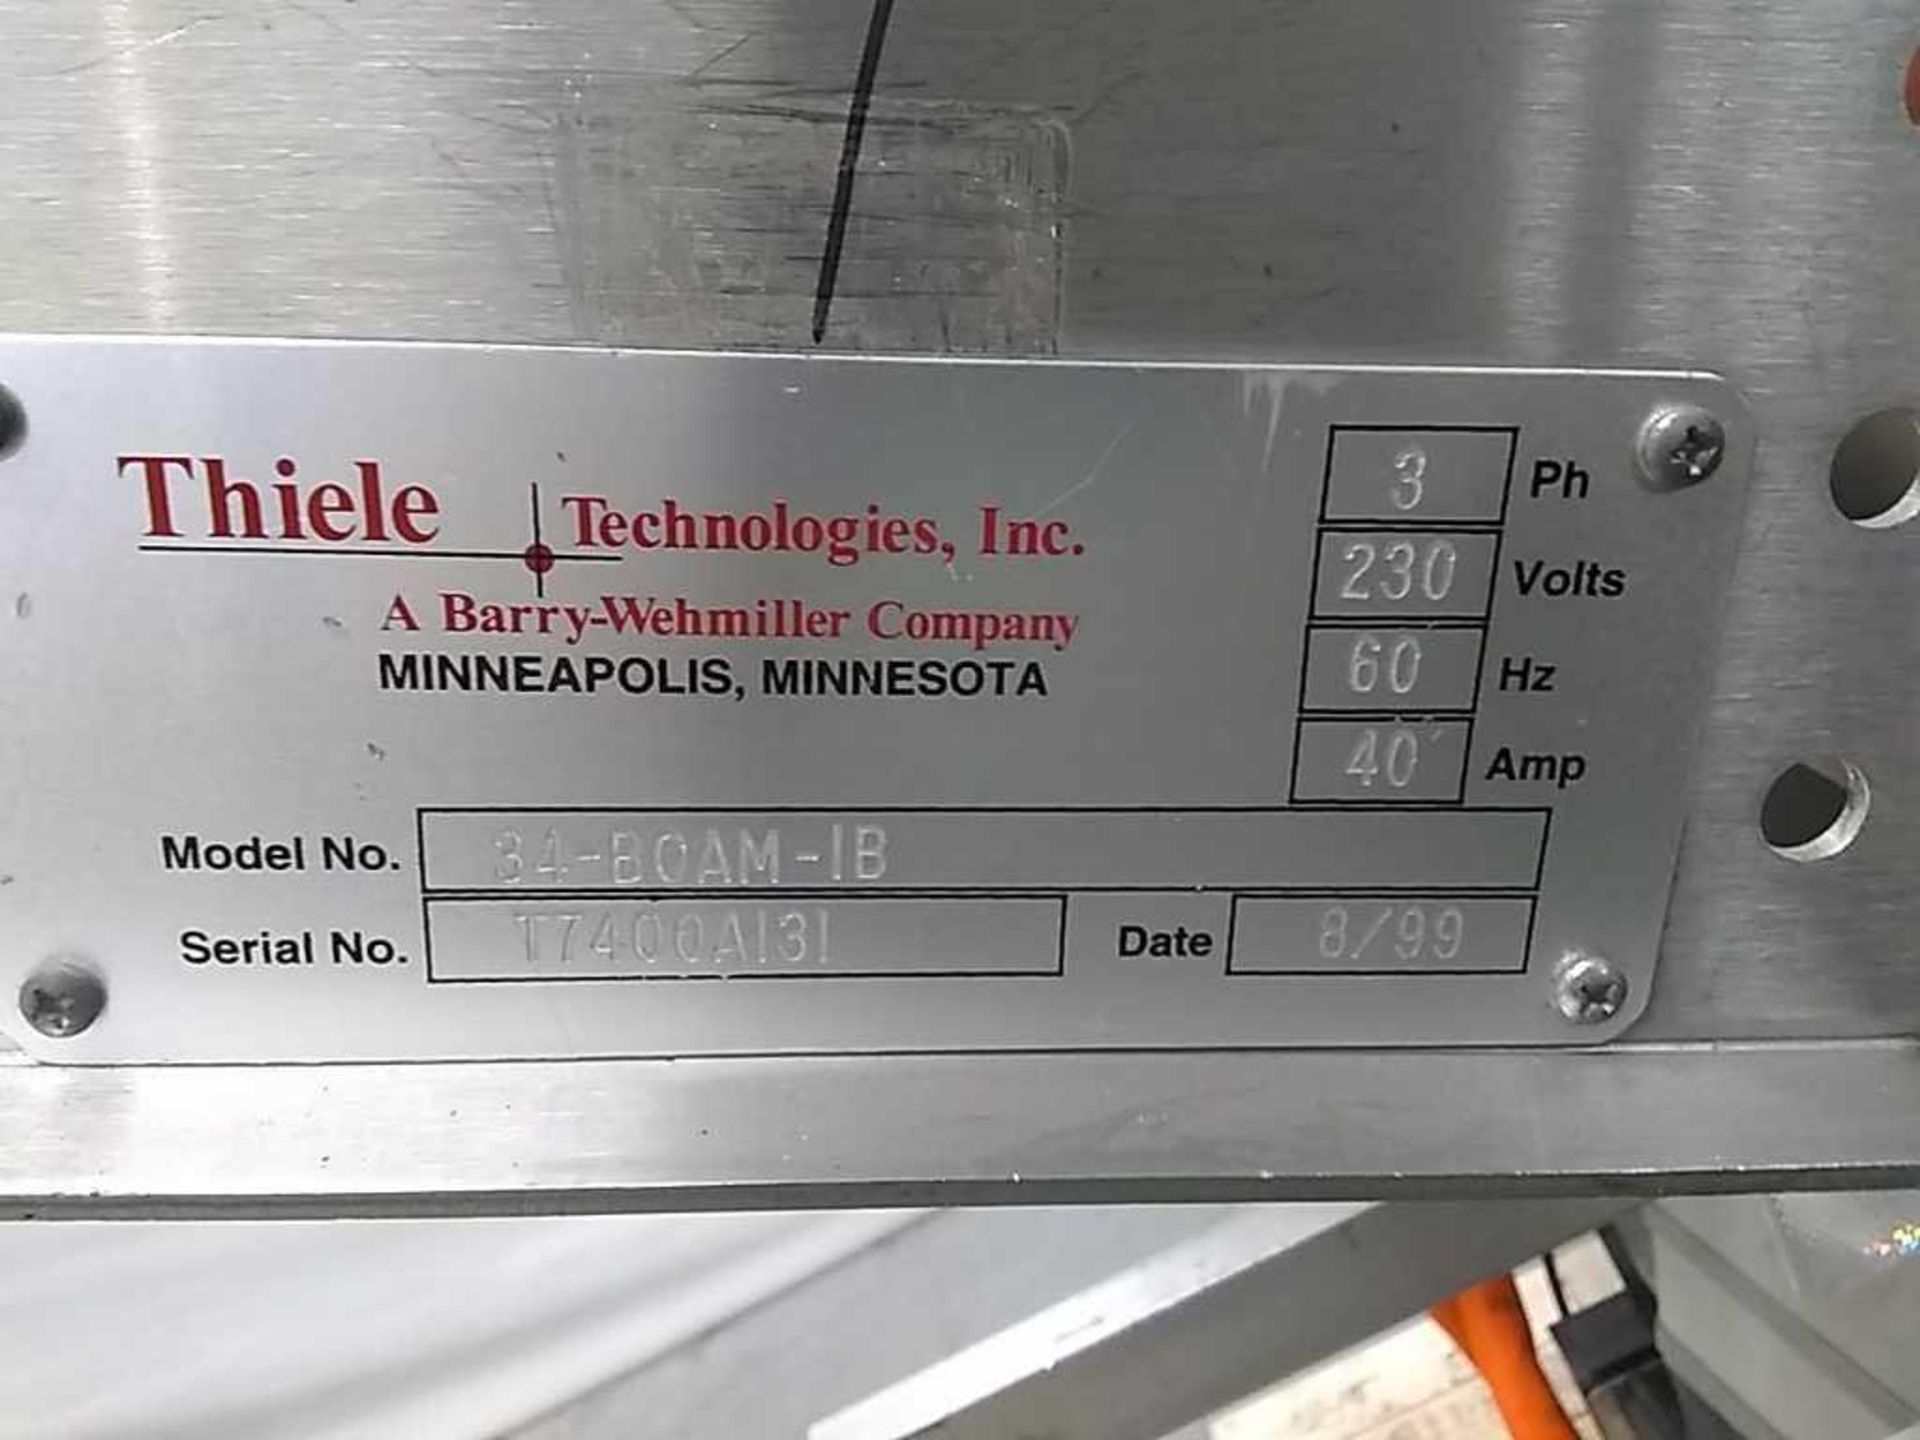 Barry-Wehmiller Thiele Technologies Inc model 33-BOAM-1B Top Sorted Model 304-BOAM-1B sn T7400A131 - Image 4 of 13